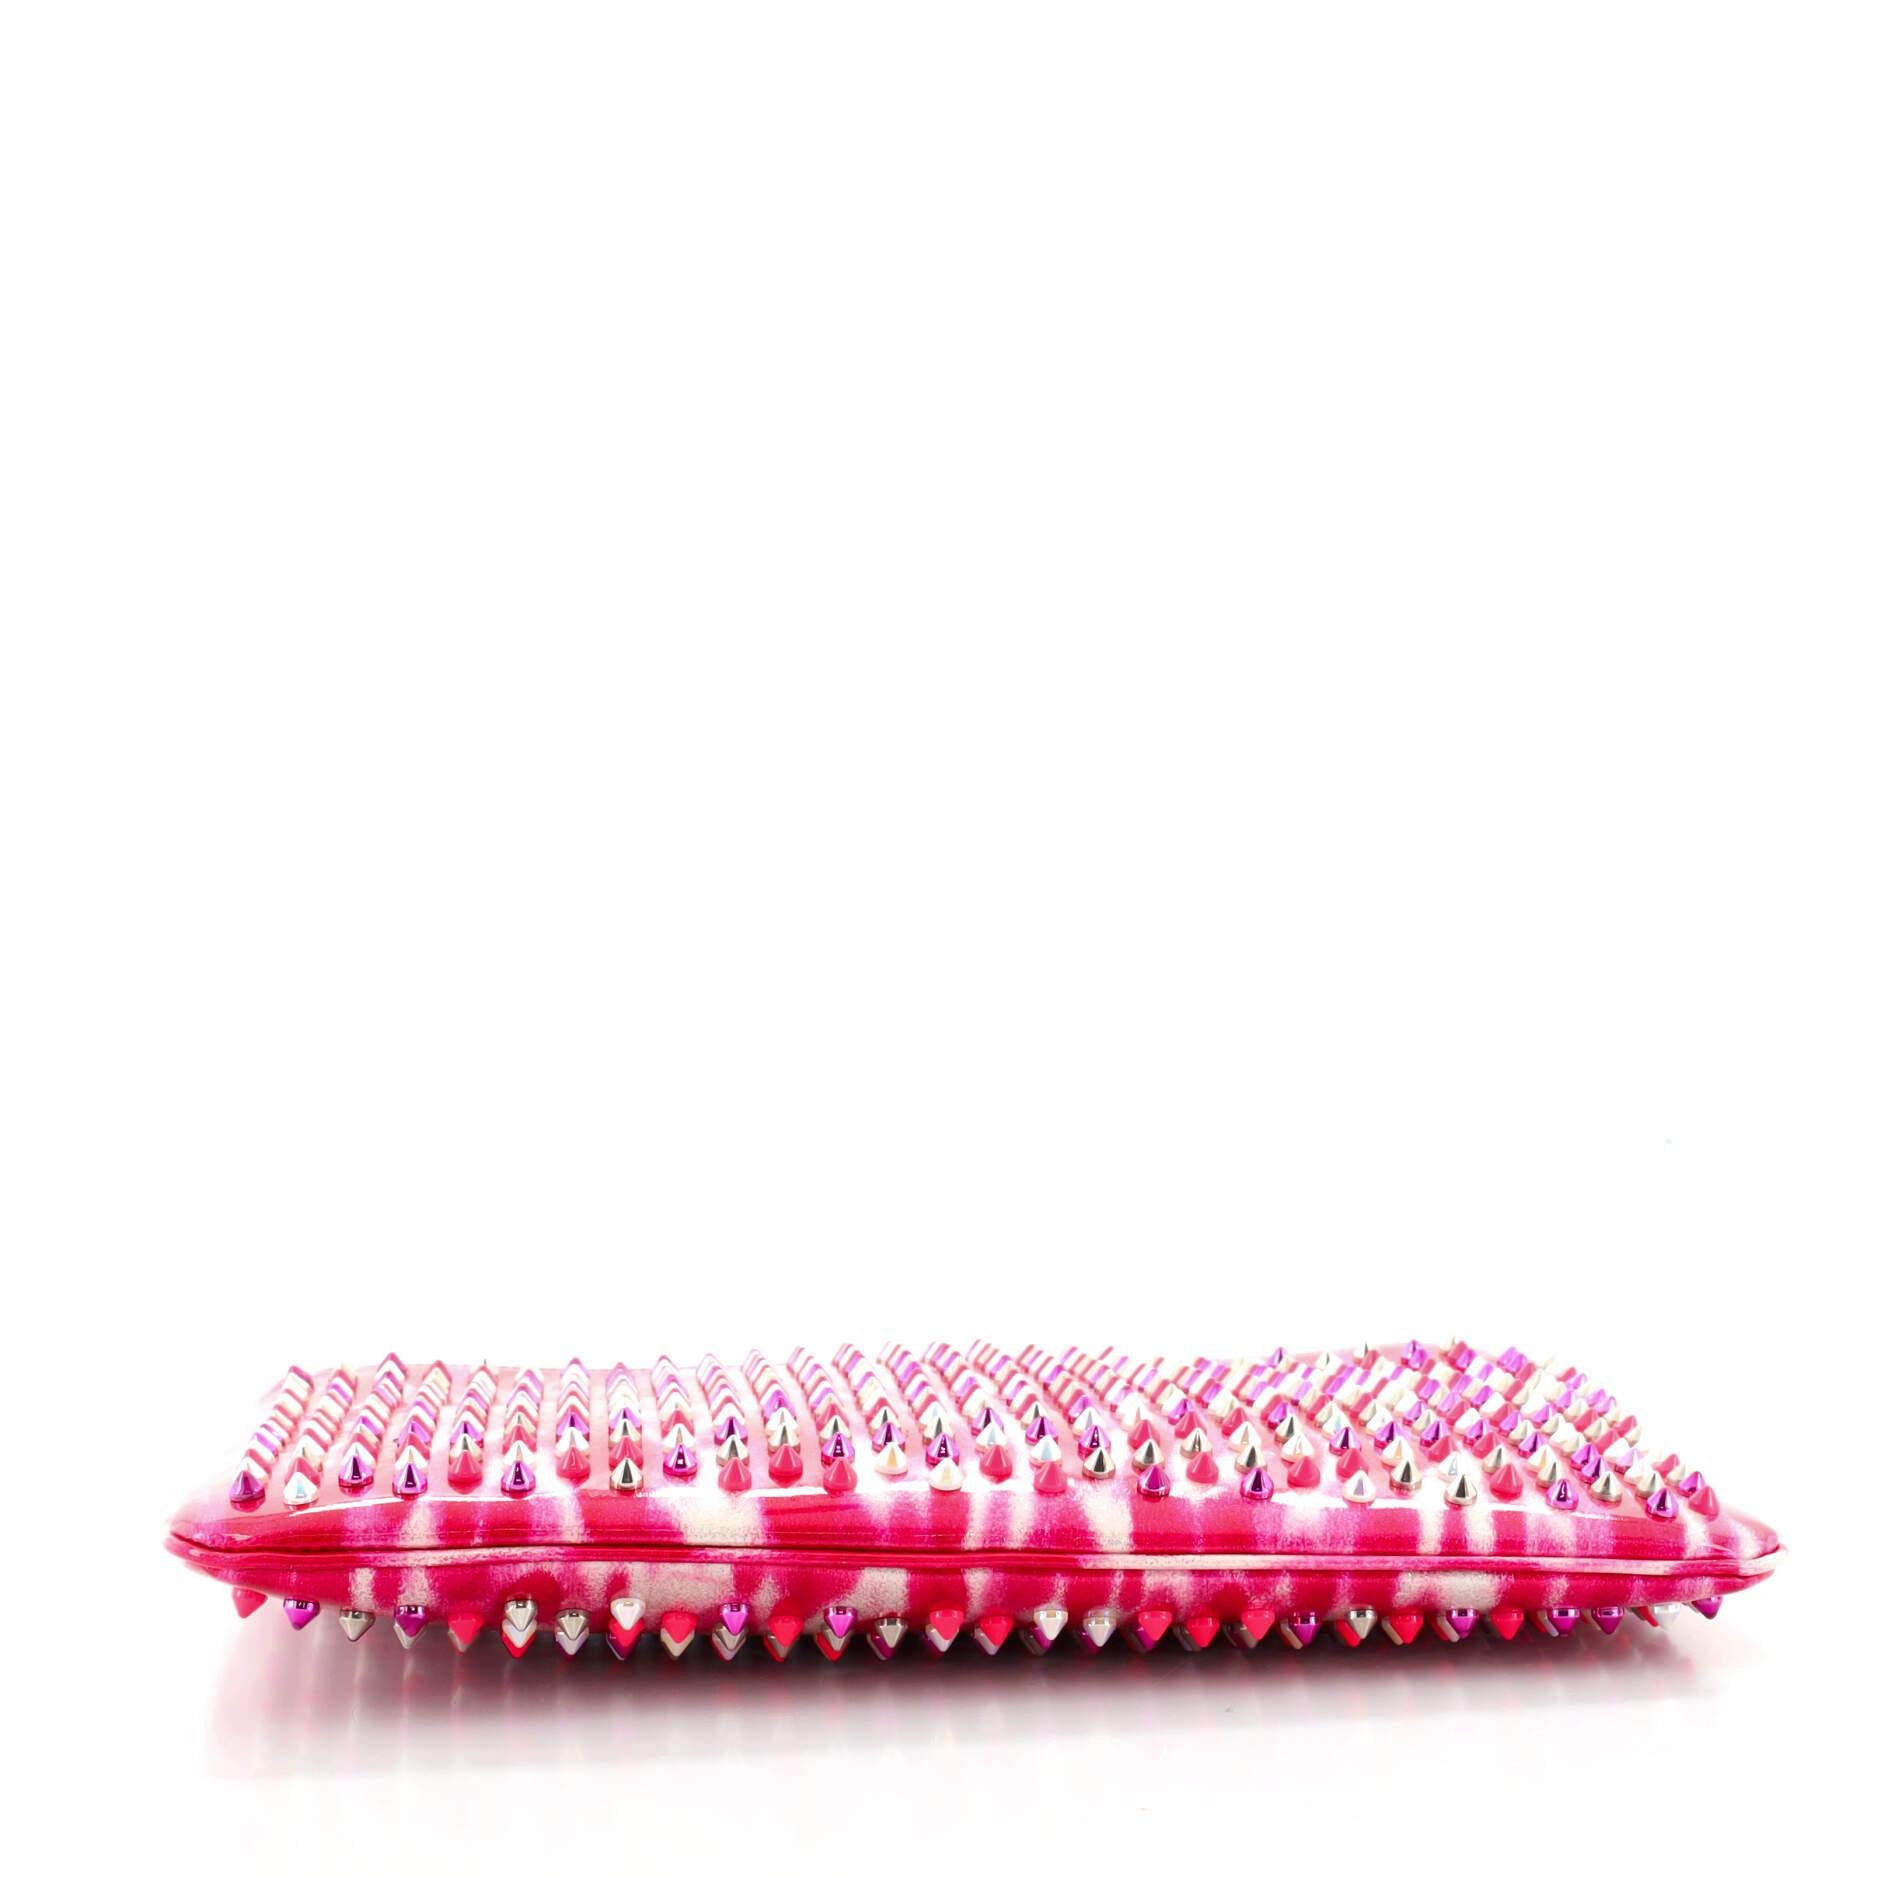 Women's or Men's Christian Louboutin Loubiposh Clutch Printed Spiked Patent